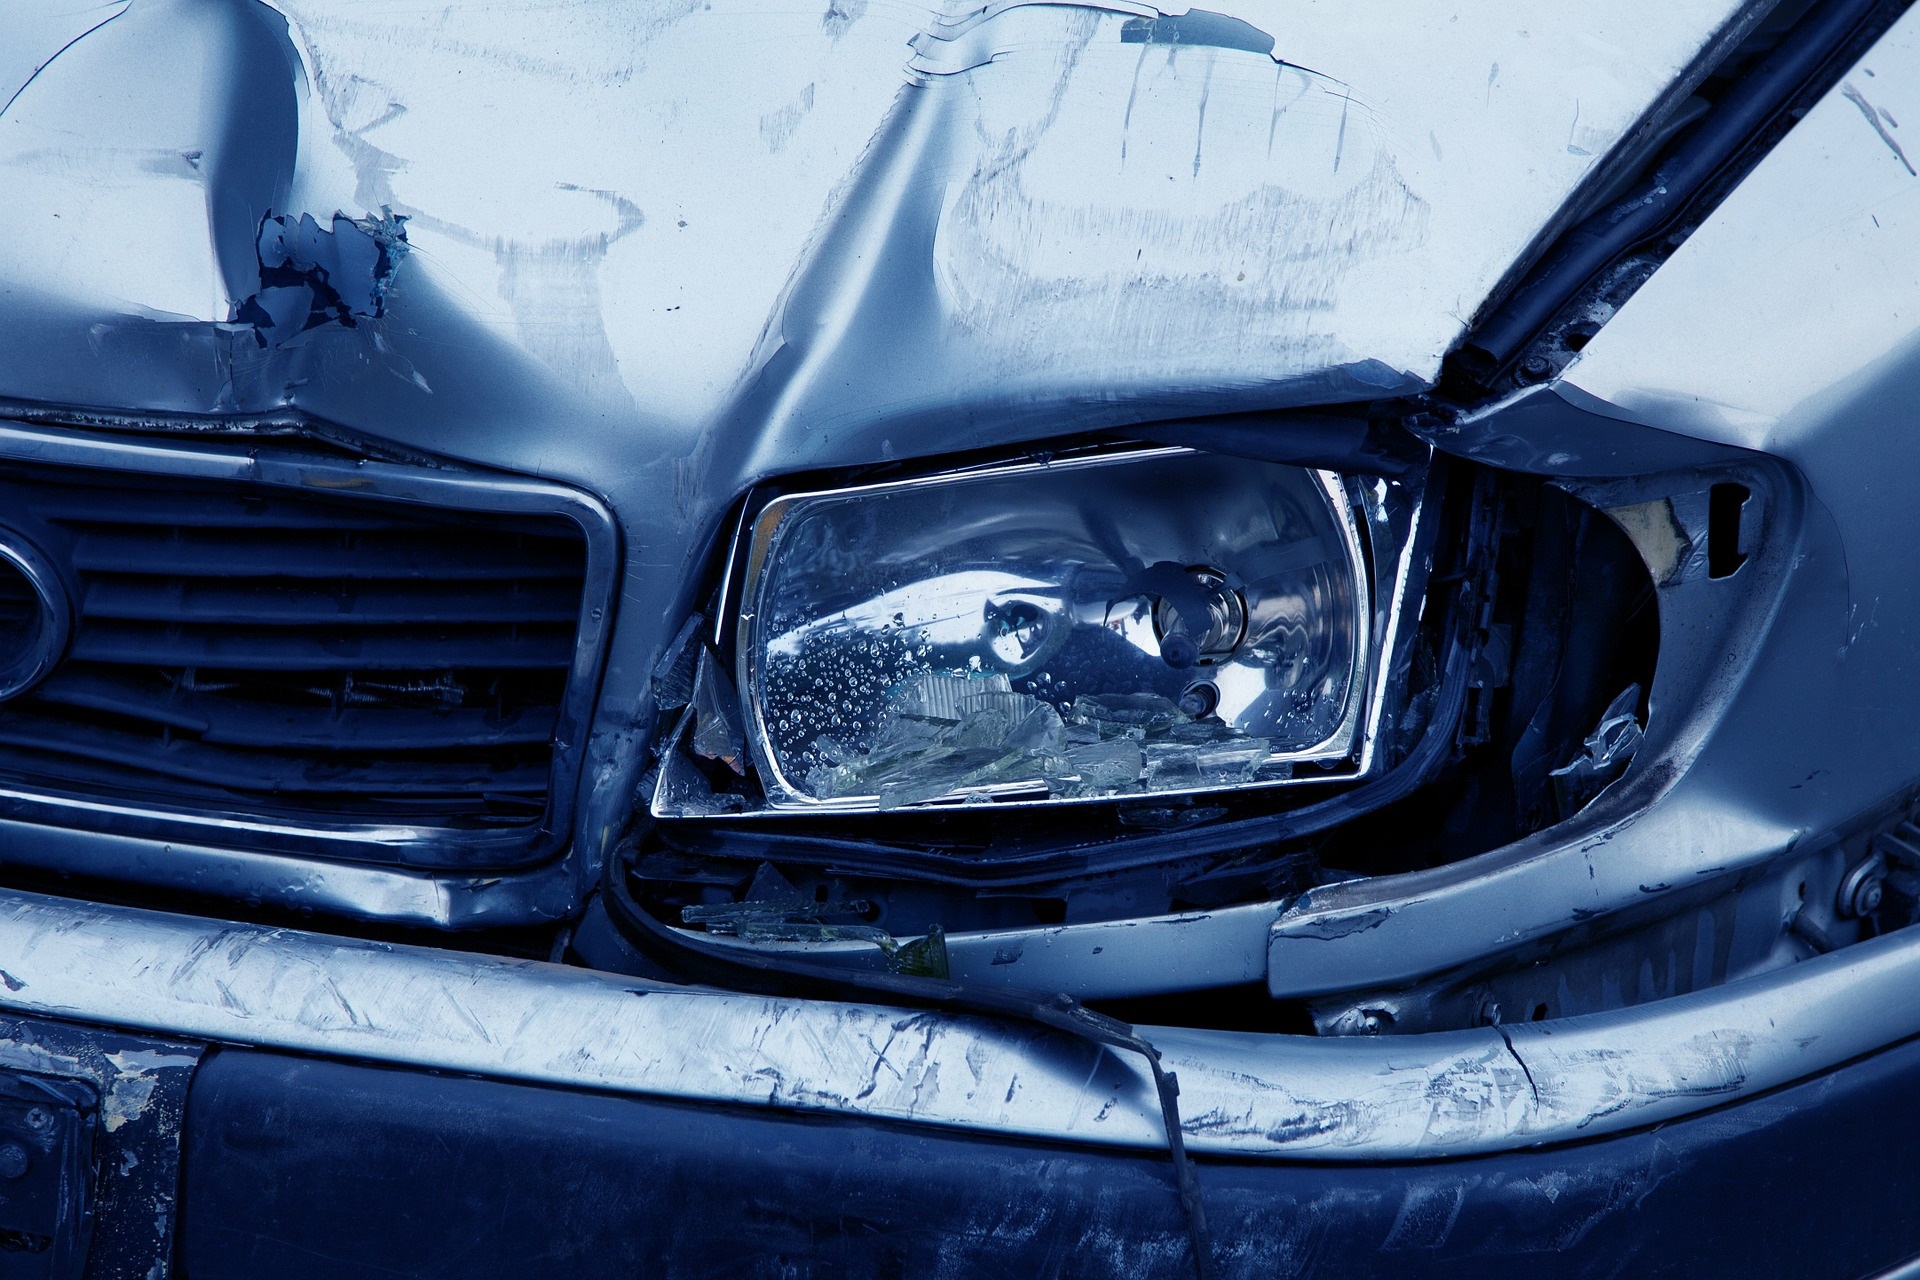 Tips for Preserving Evidence after a Car Accident